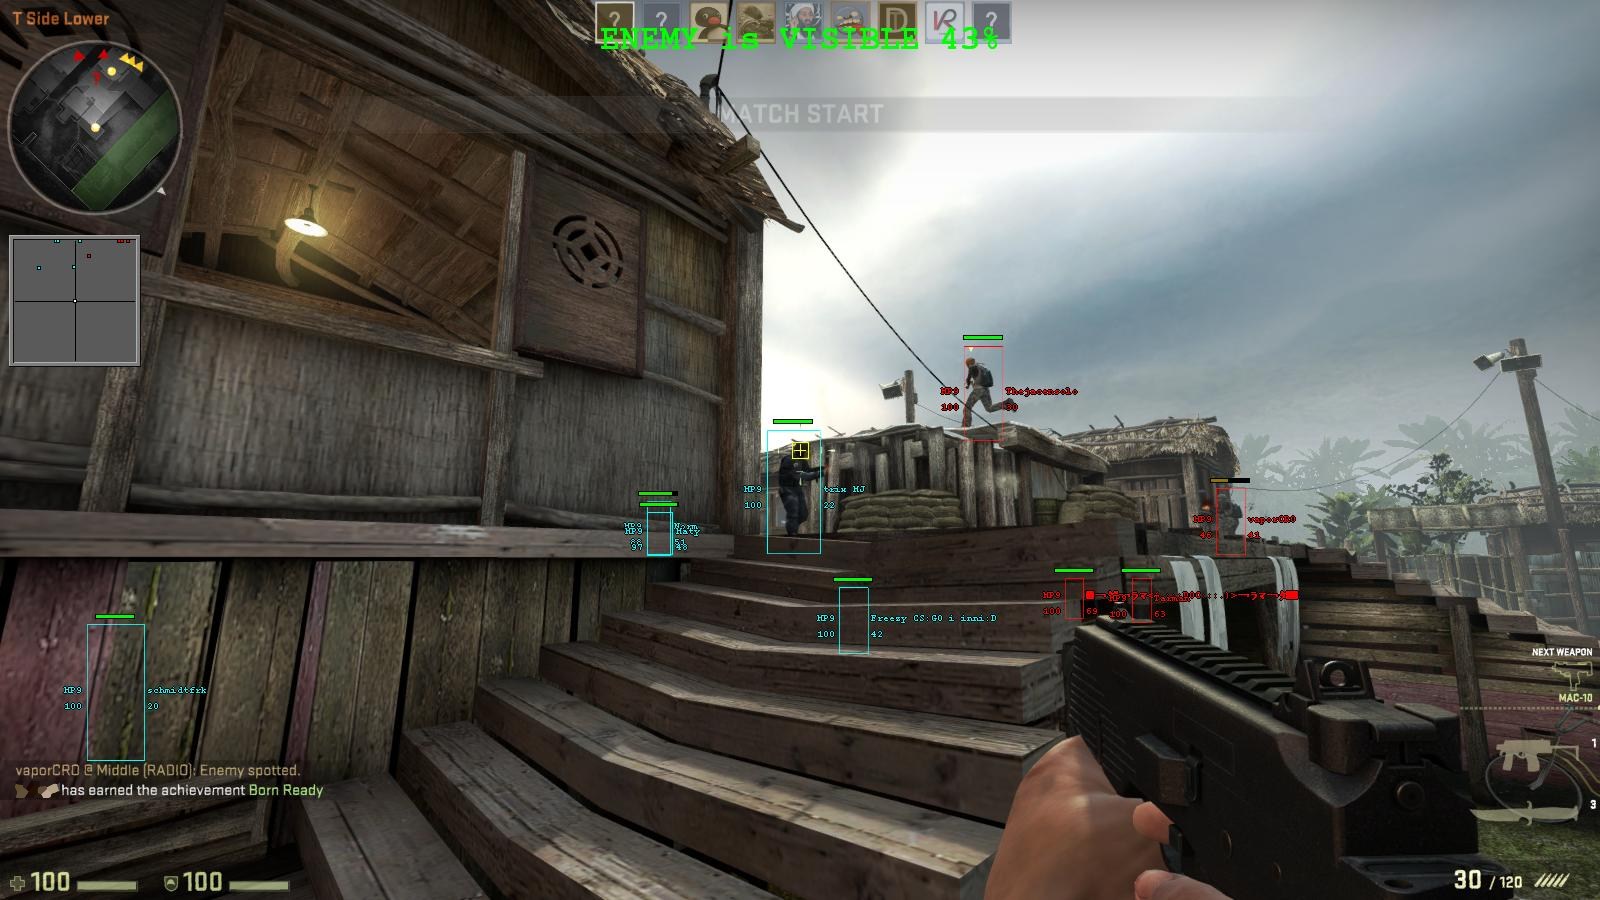 Mouse Hack Aimbot + No Recoil - 